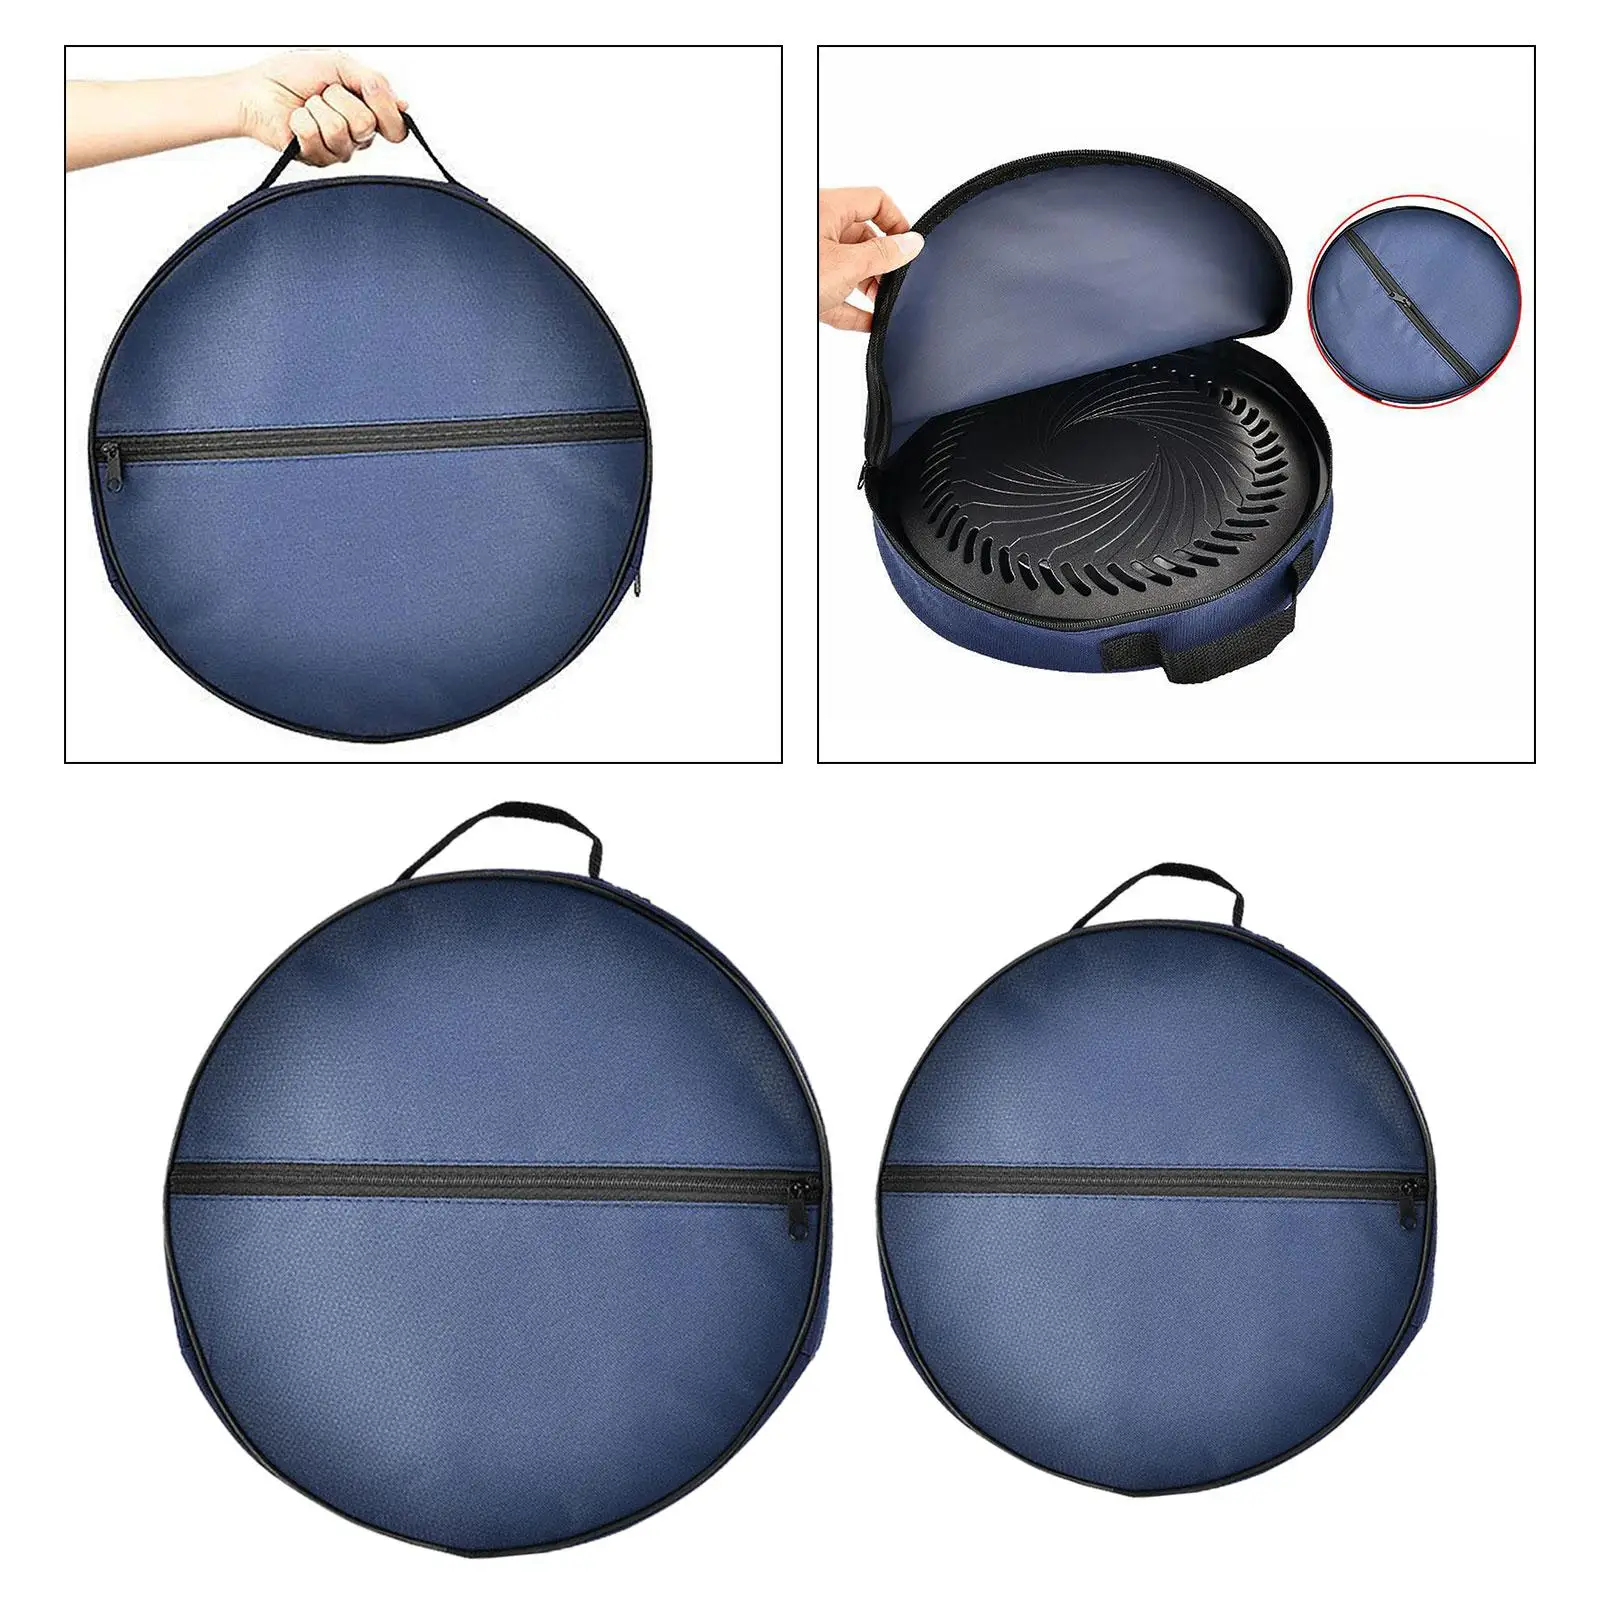 Grill Pan Storage Bag with Handle Heavy Duty Cast Iron Skillet Bag Camping Cookware Organizer Handbag for Picnic, BBQ, Hiking